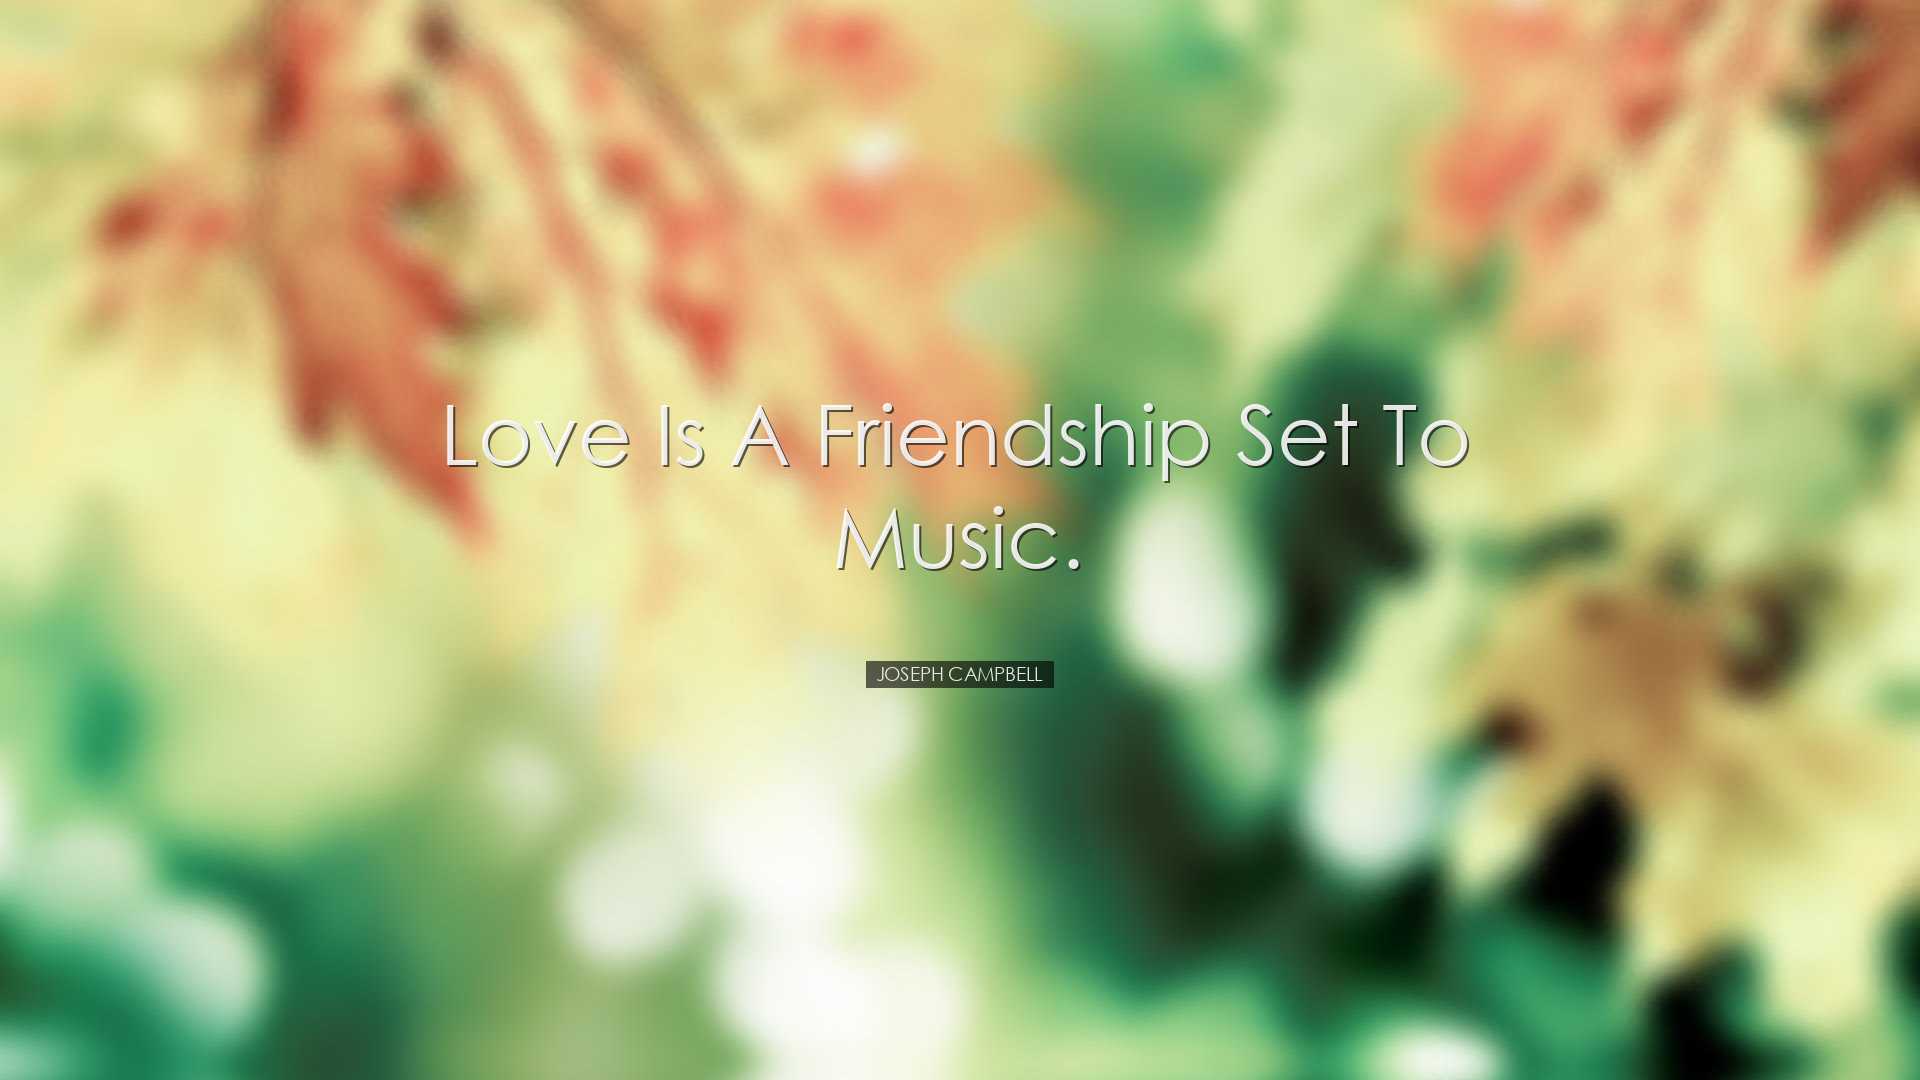 Love is a friendship set to music. - Joseph Campbell